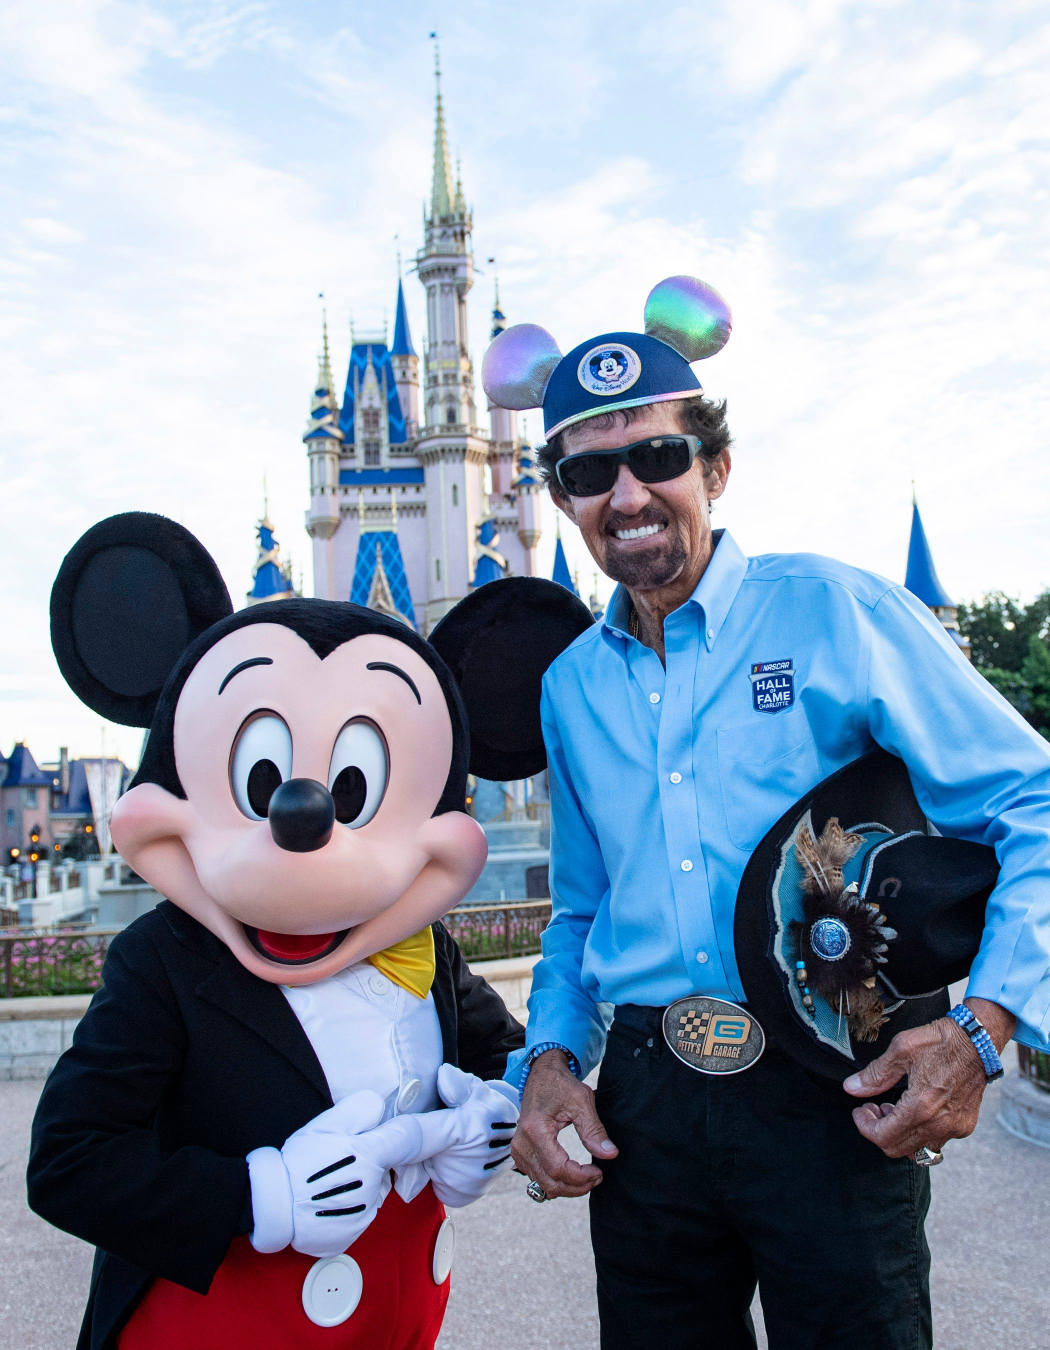 NASCAR Legend Richard Petty Shares Iconic Moment With Mickey Mouse